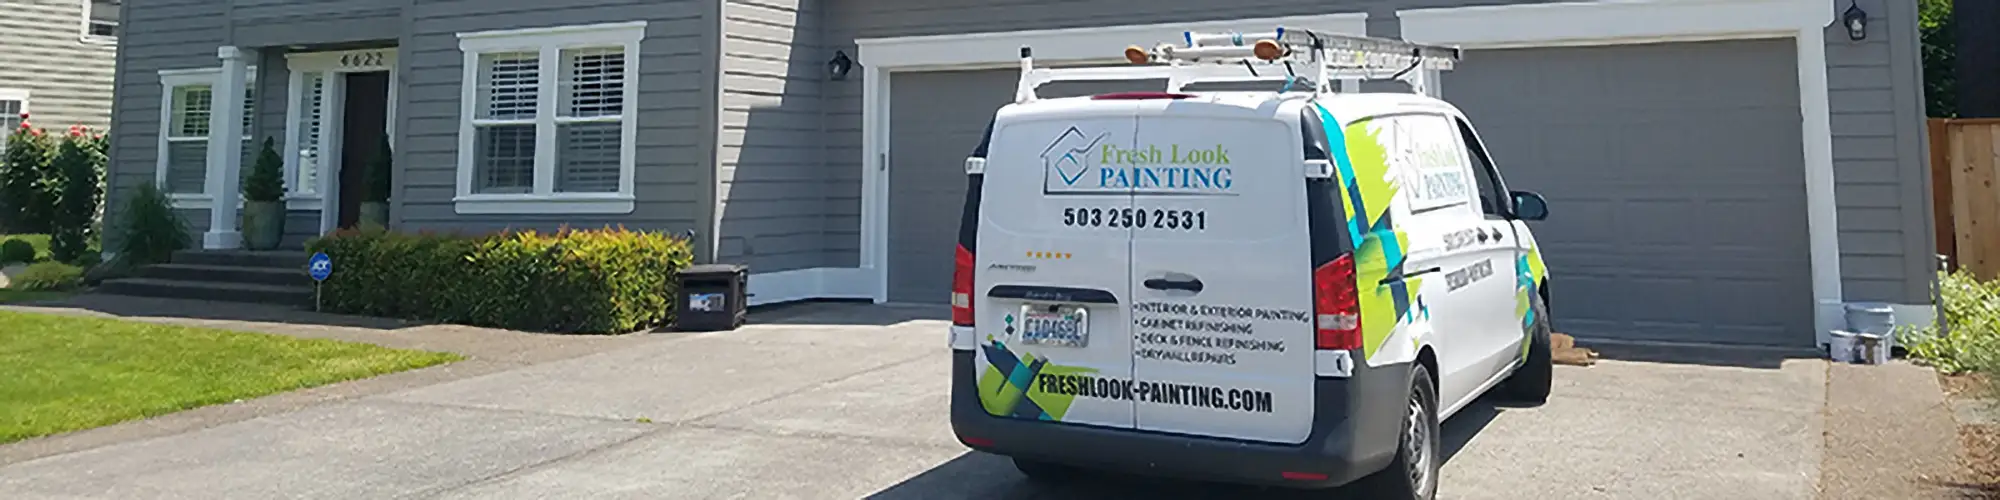 The Benefits Of Working With Fresh Look Painting